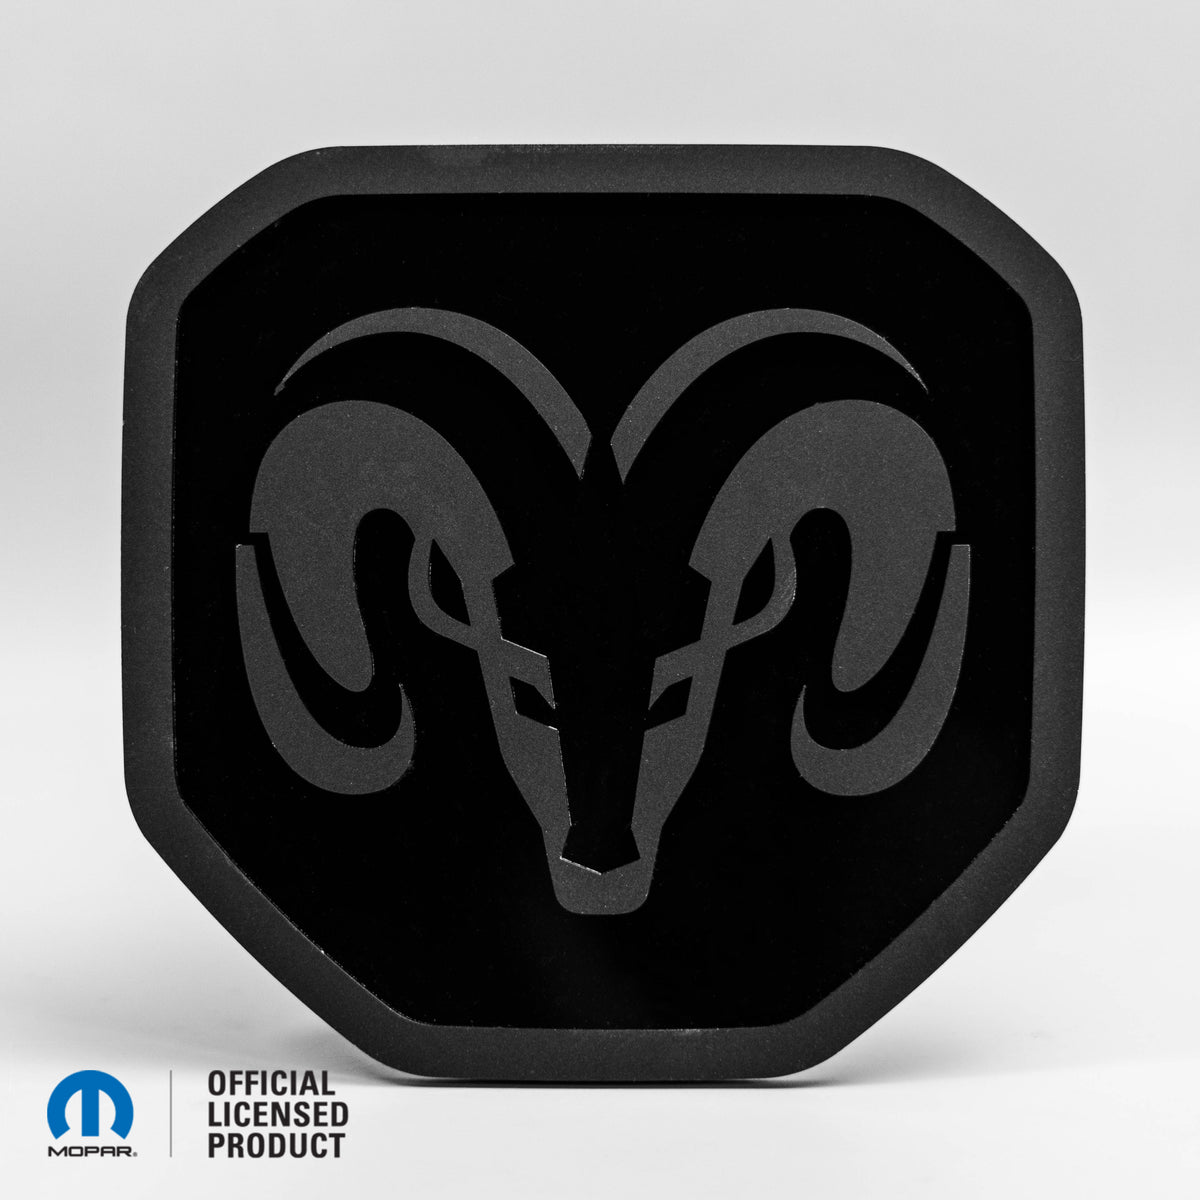 RAM® Head Logo Style 1 Tailgate Badge - Fits 2019+ RAM® Tailgate - 1500, 2500, 3500 - Matte on Gloss - Officially Licensed Product